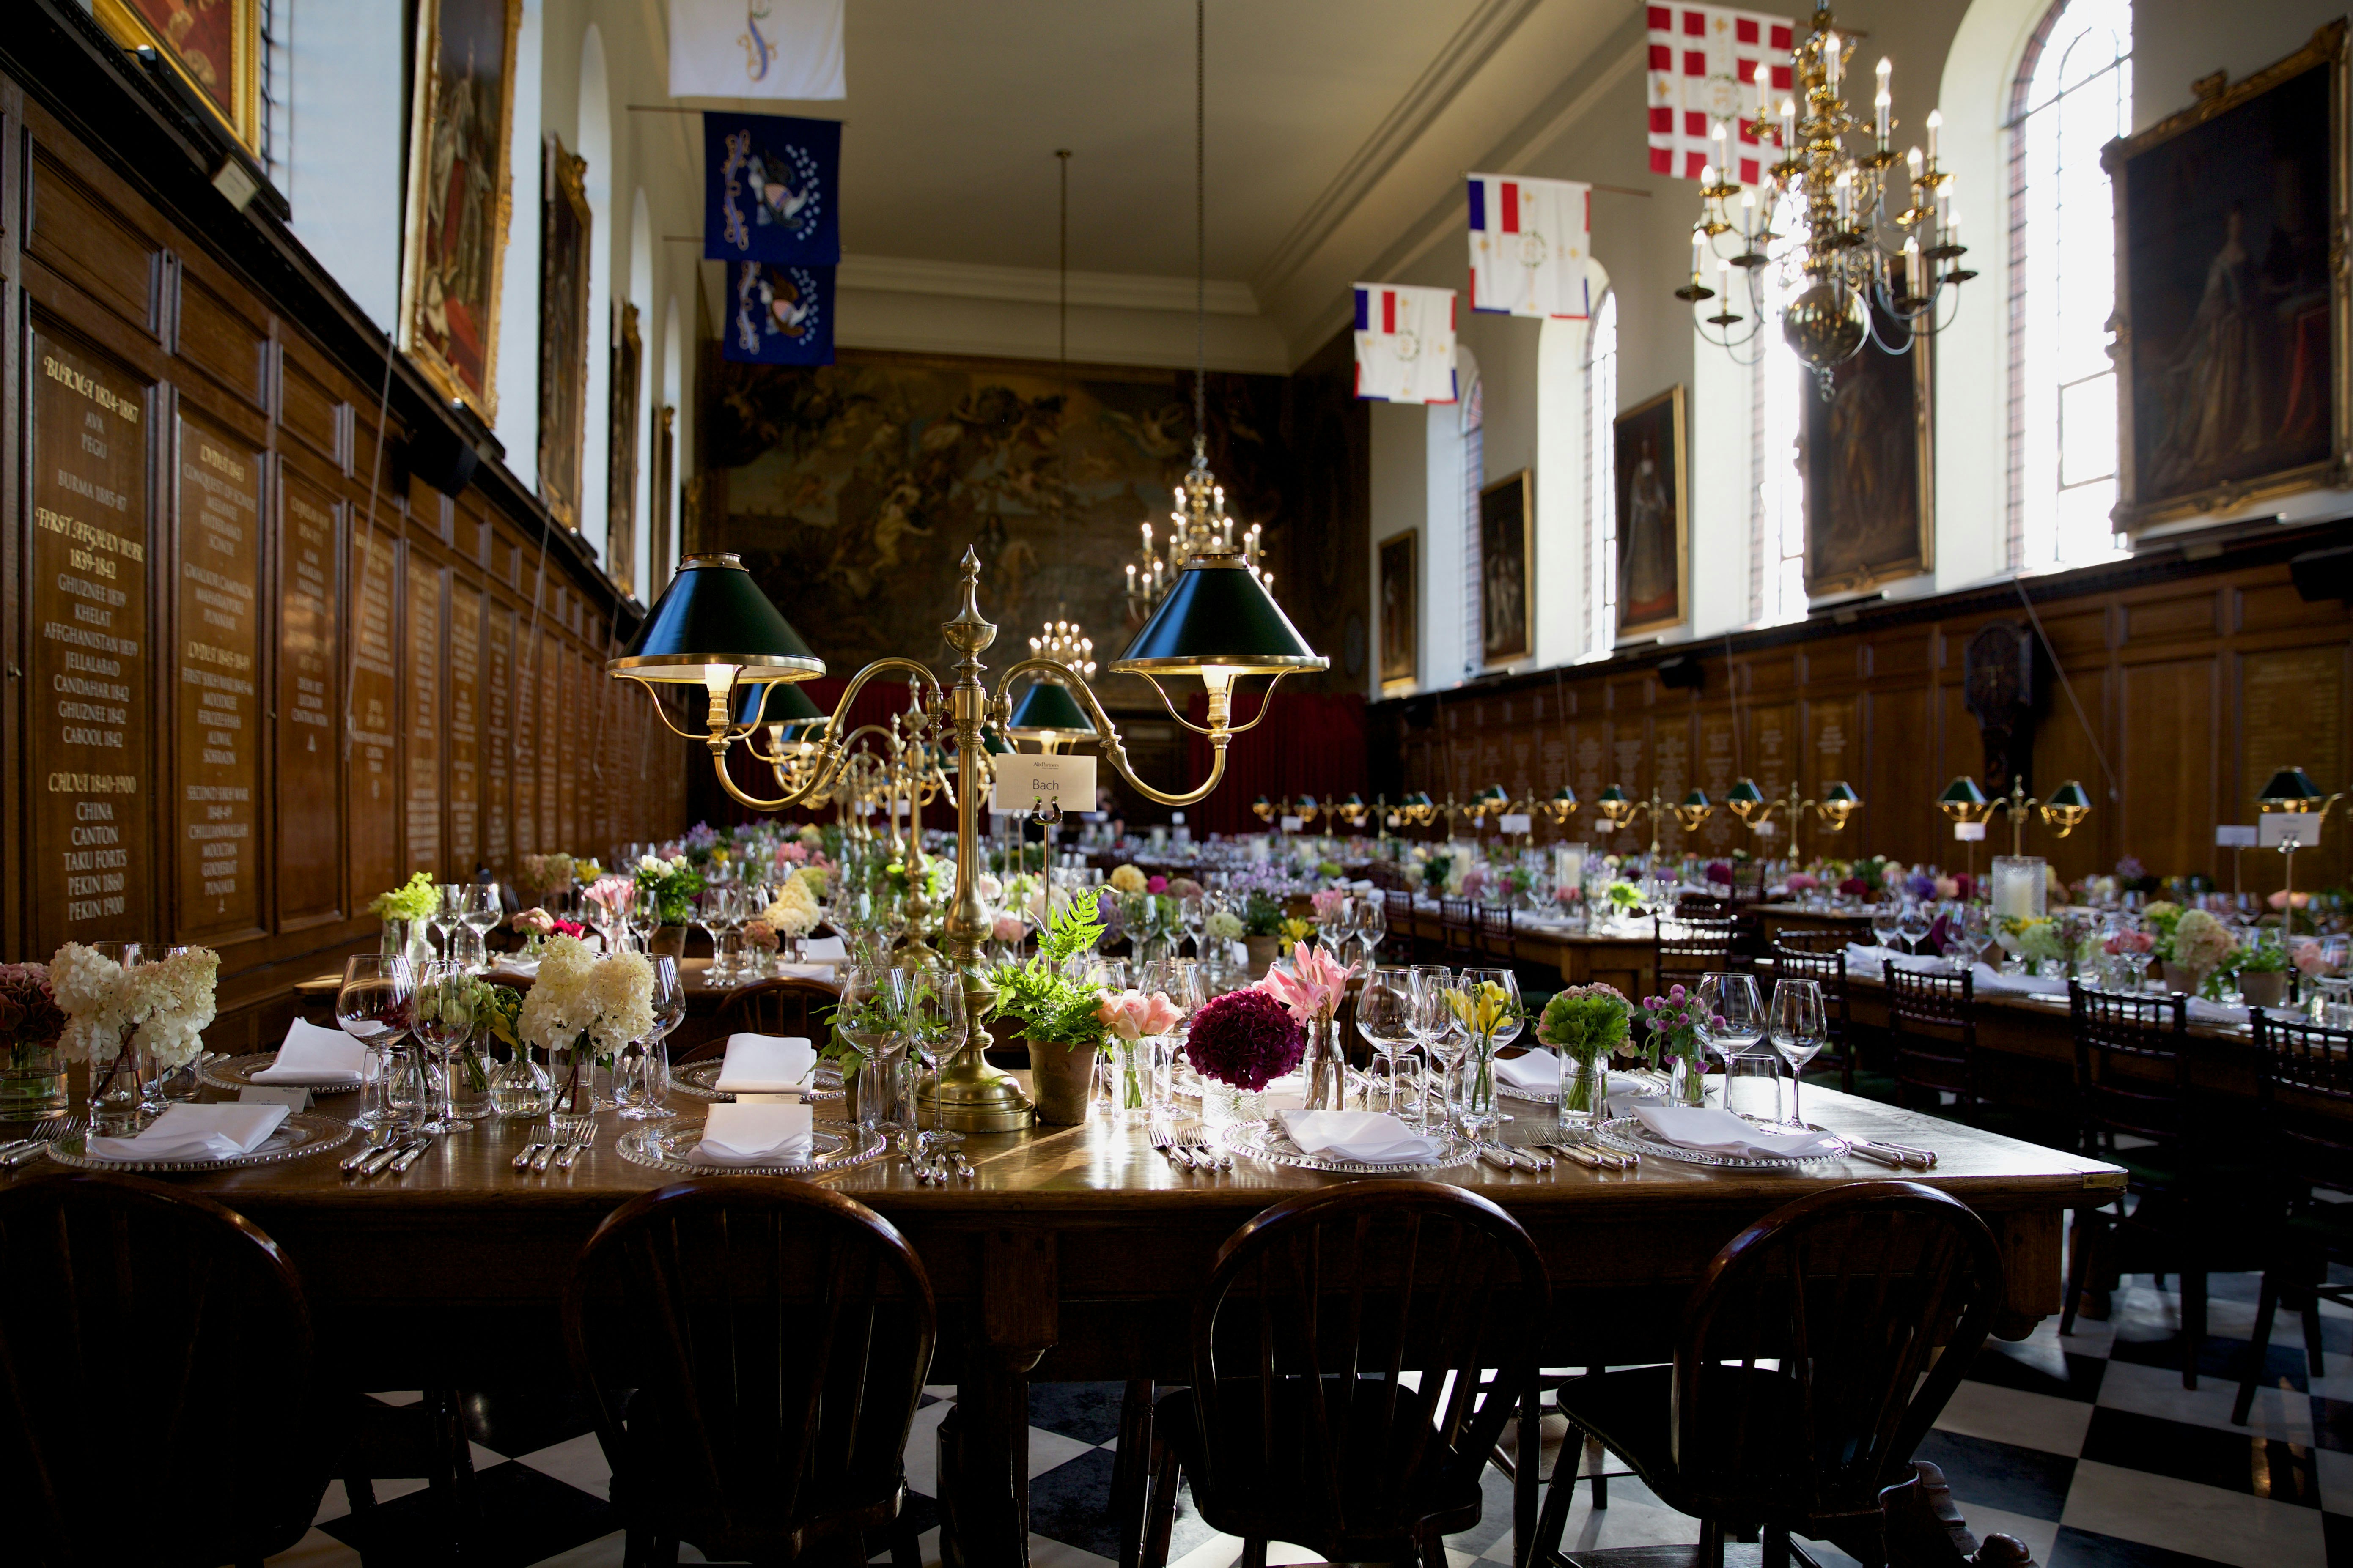 Royal Hospital Chelsea - The Great Hall image 8